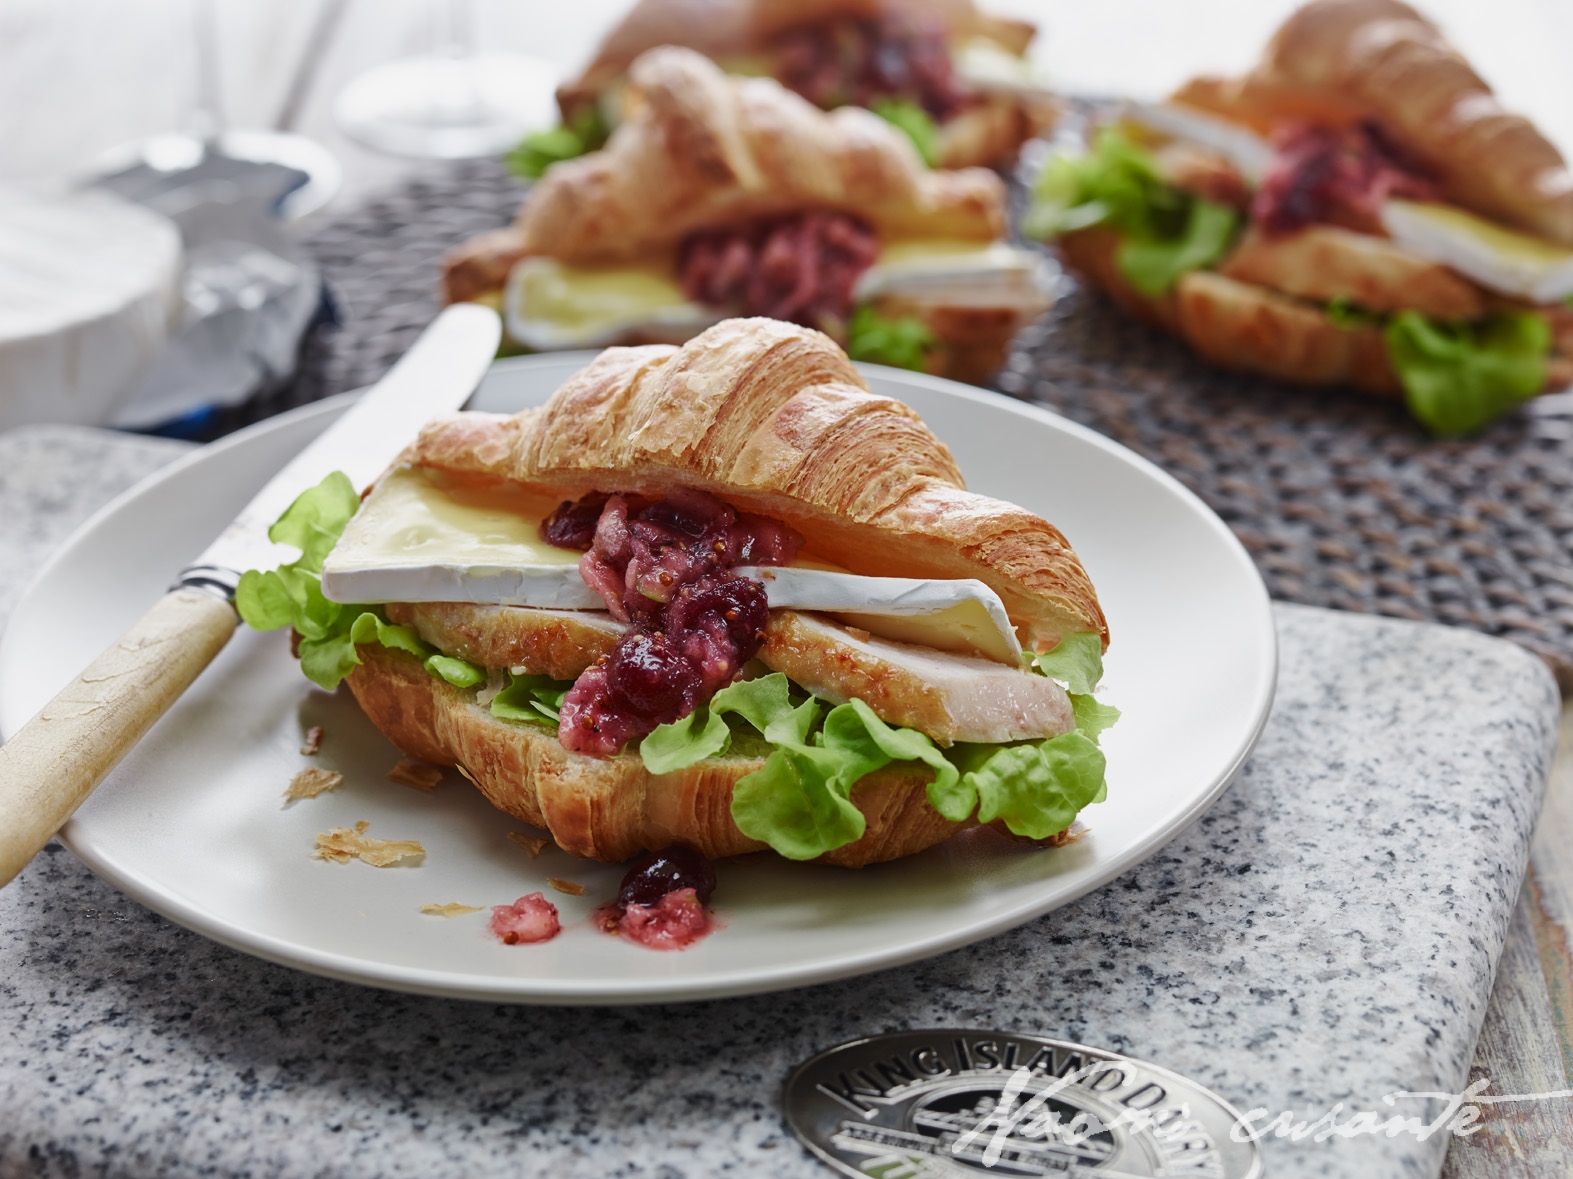 Chicken and Camembert Croissants with Cranberry Apple Relish